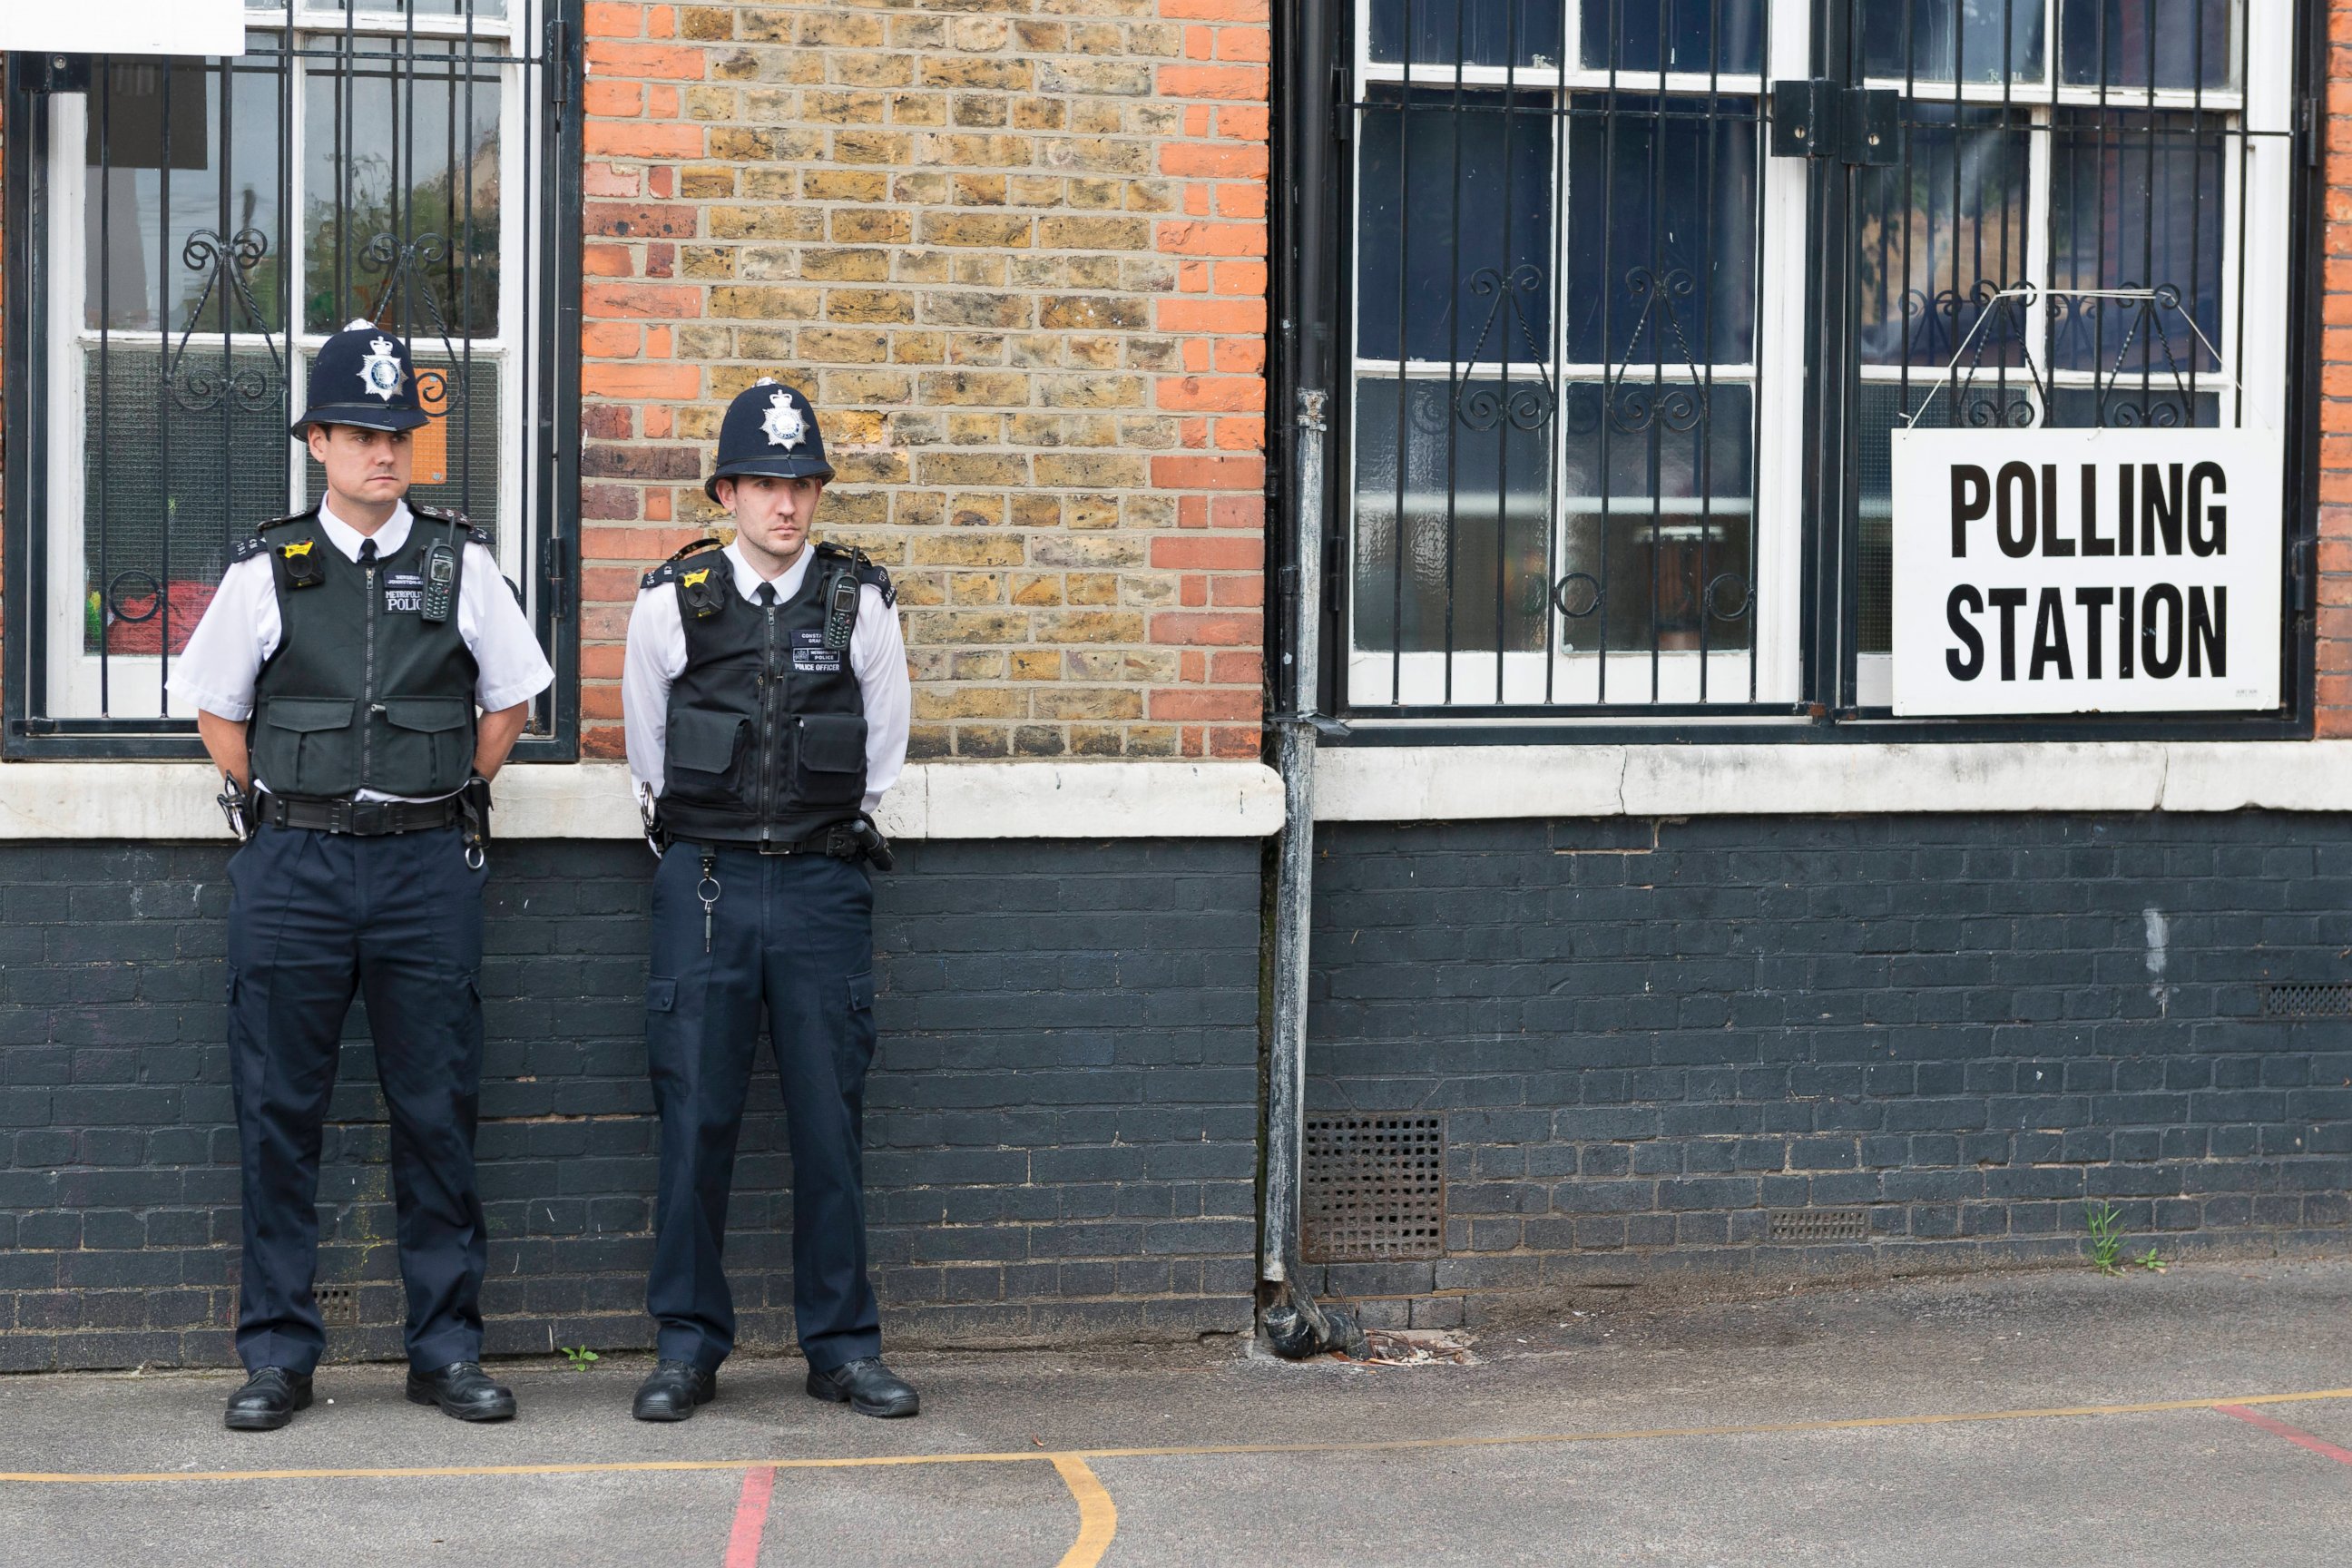 PHOTO: Police at a polling station in Islington, London, June 8, 2017.